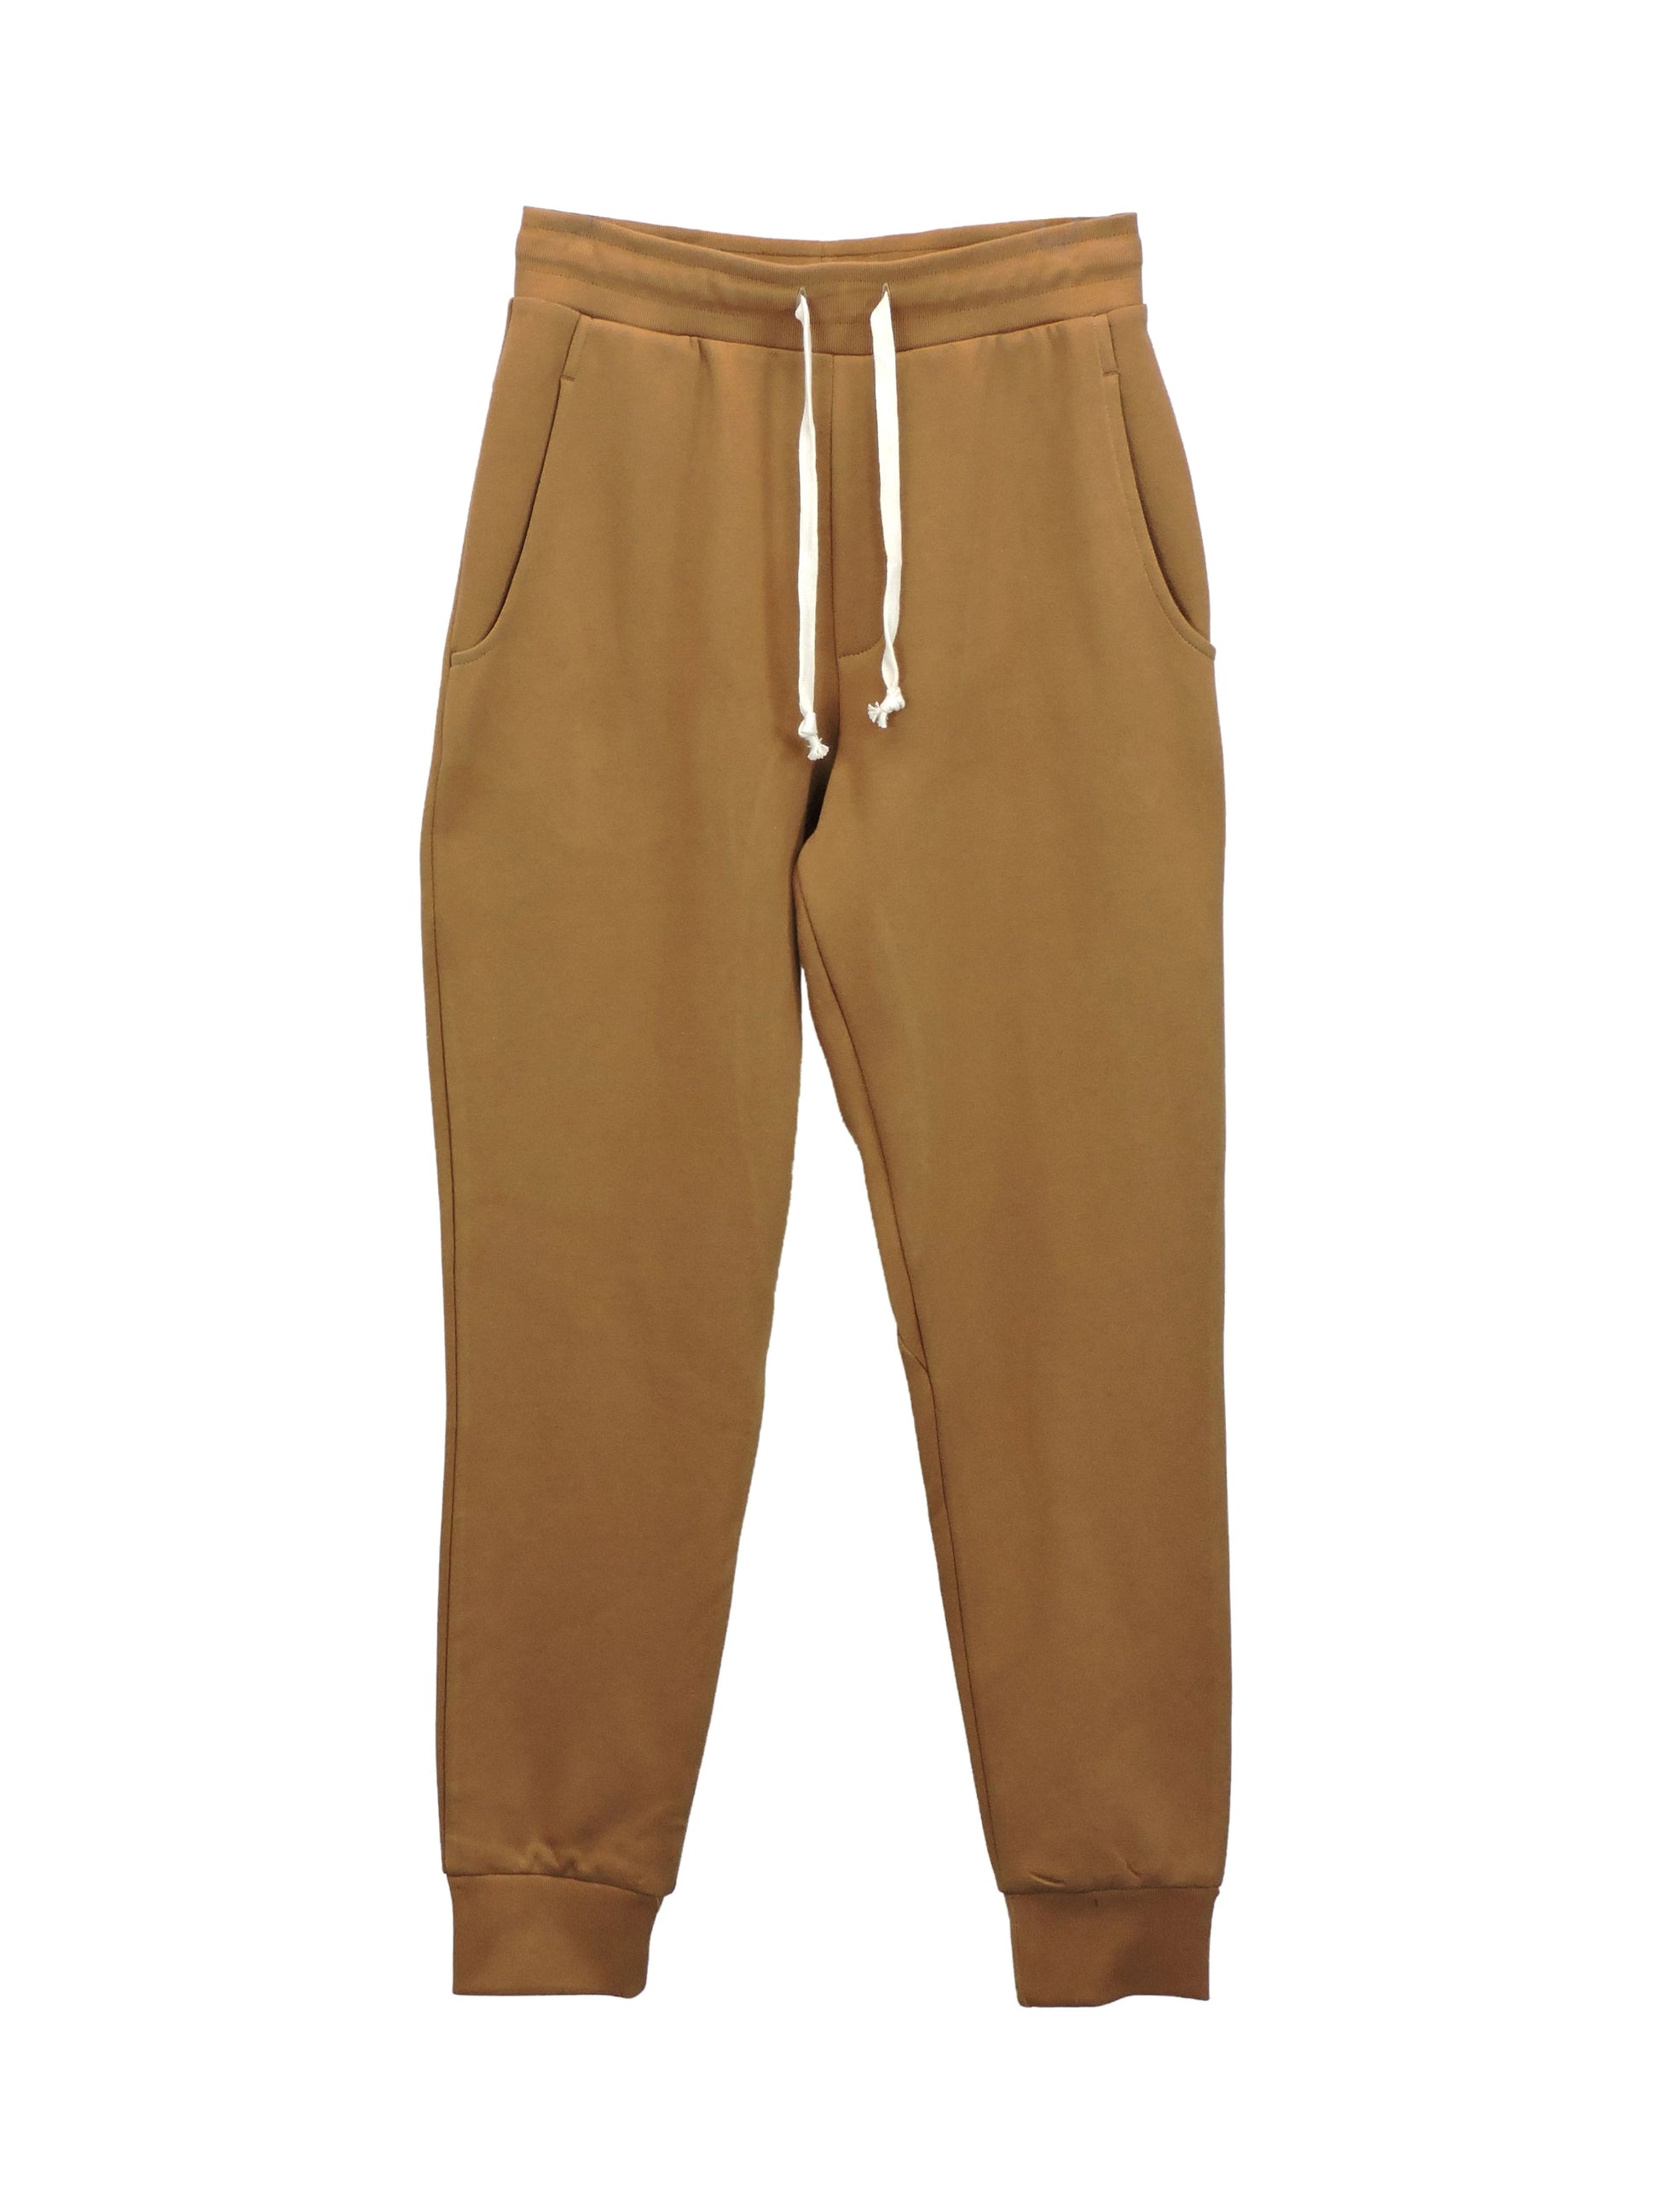 Brown Fleece Jogger in Groundhog Brown with White Drawstrings